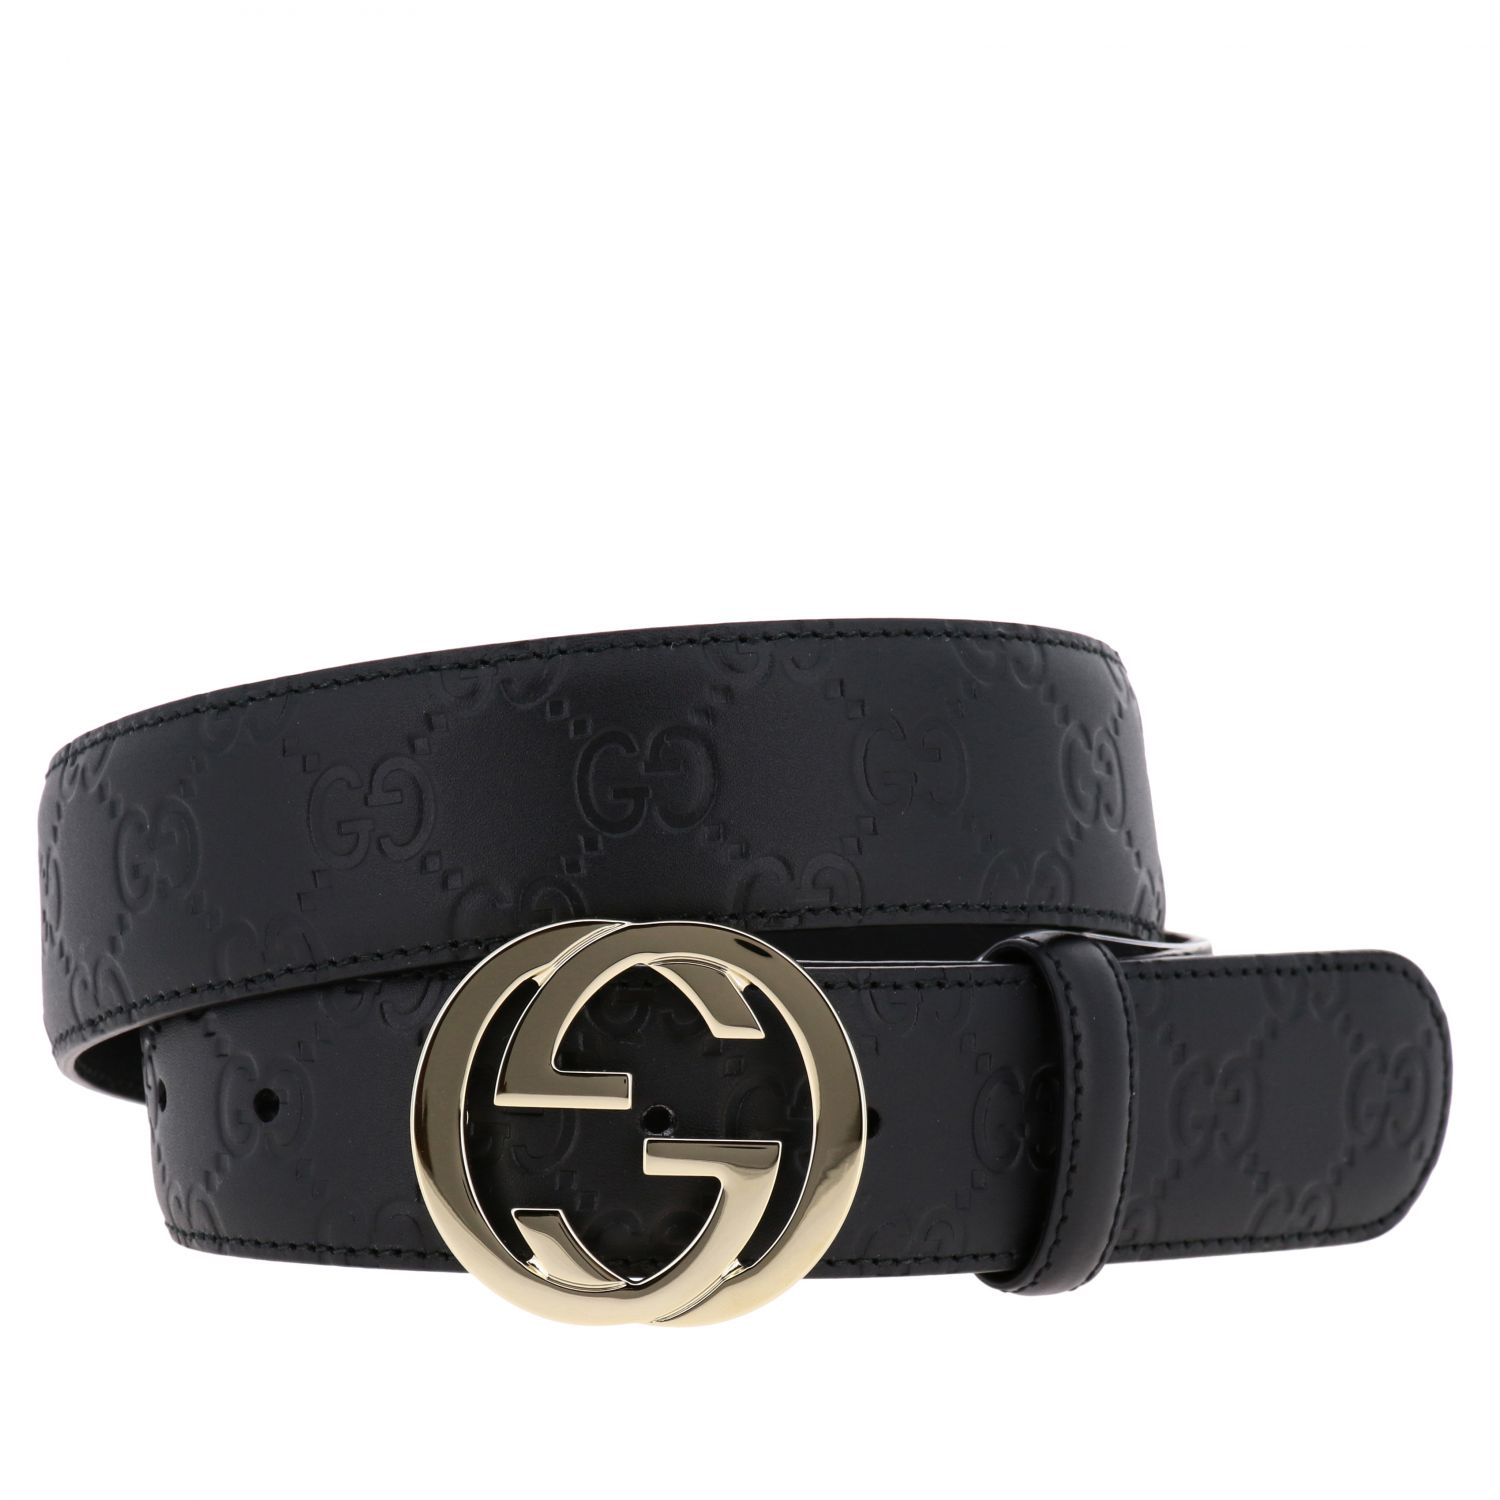 GUCCI: leather belt with GG buckle and all over embossed logo | Belt ...